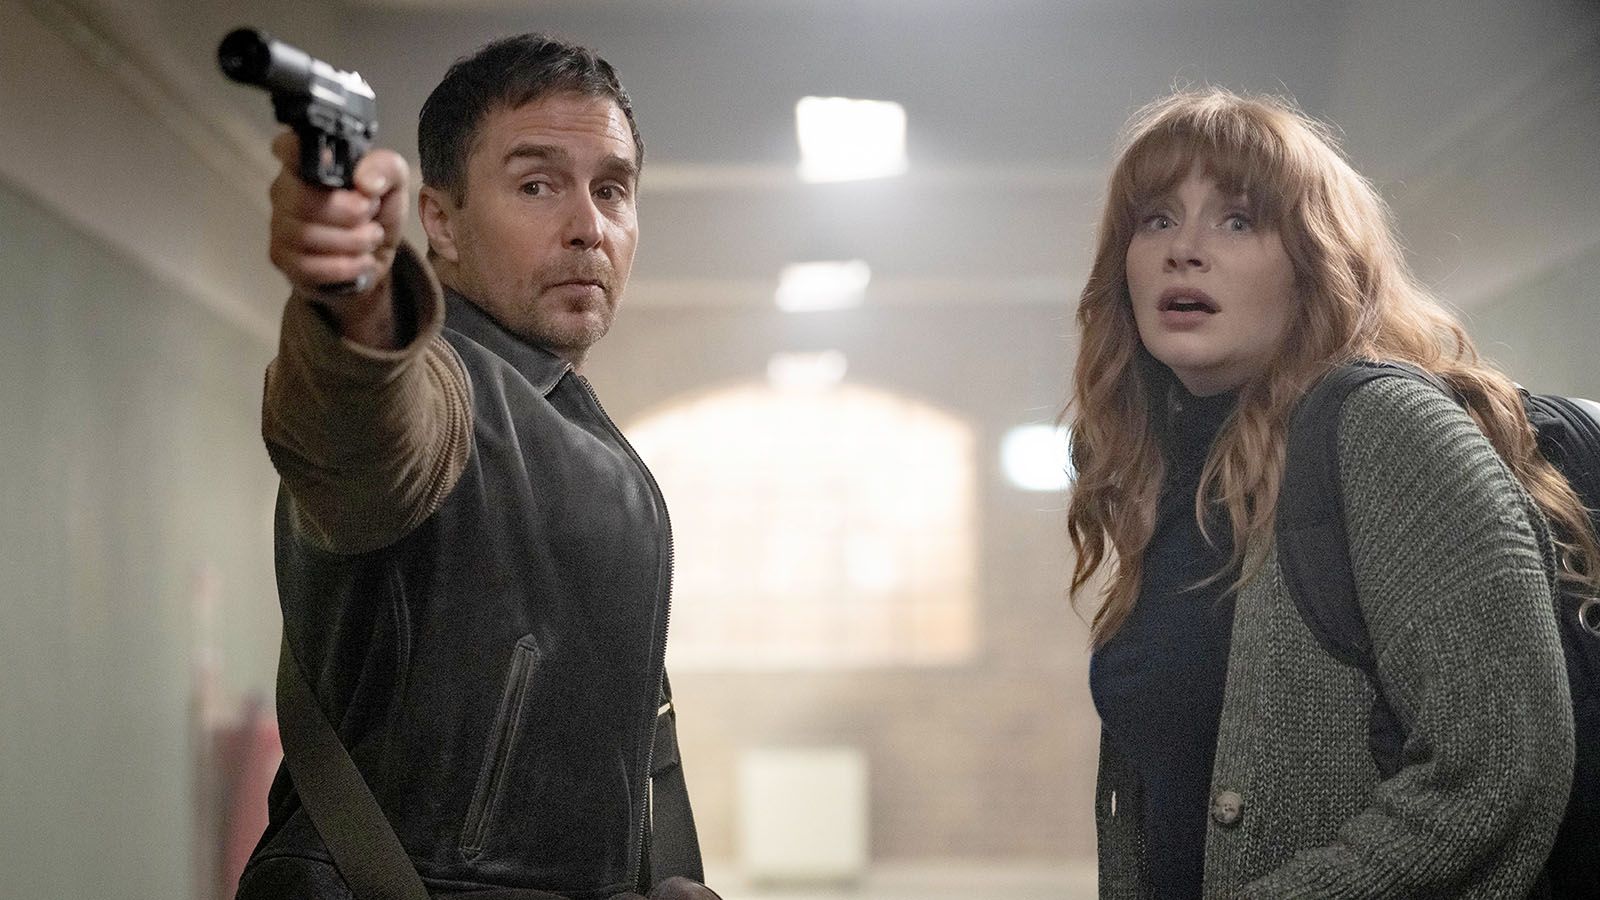 Sam Rockwell and Bryce Dallas Howard star in the new action comedy Argylle.